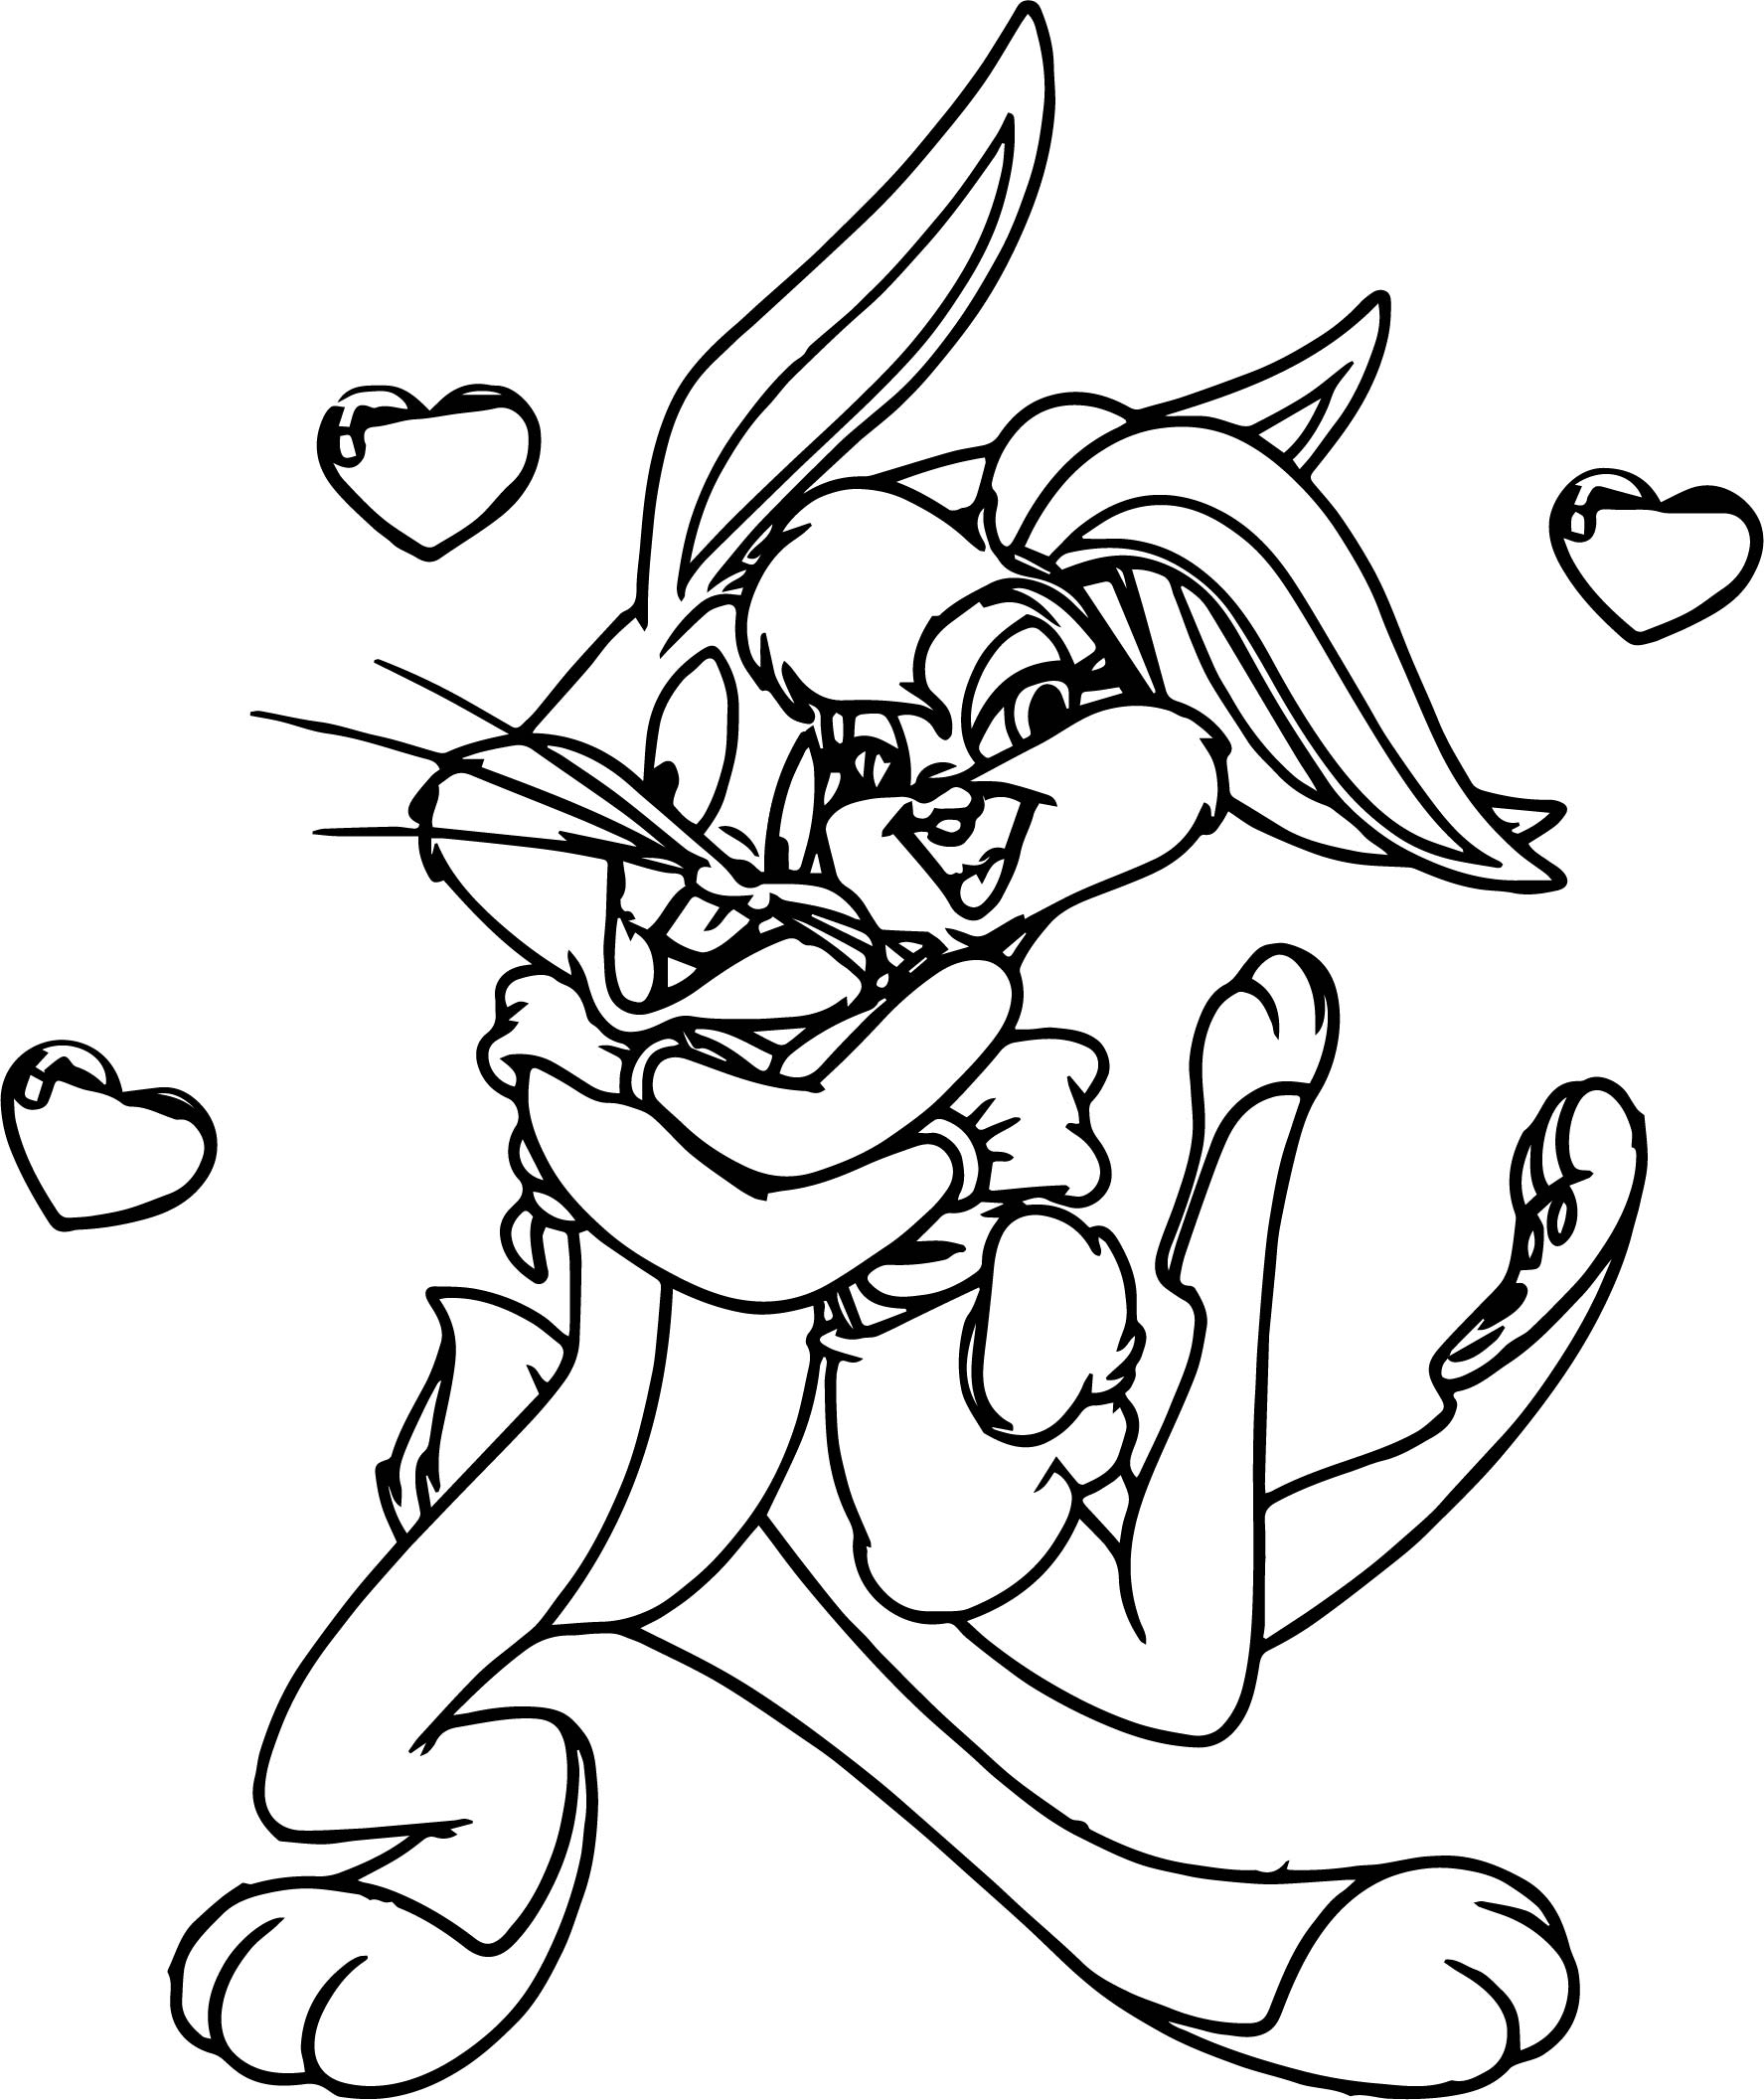 Coloring Pages : 46 Bugs Bunny Coloring Pages Picture Ideas Bugs - Free Printable Bugs Bunny Coloring Pages